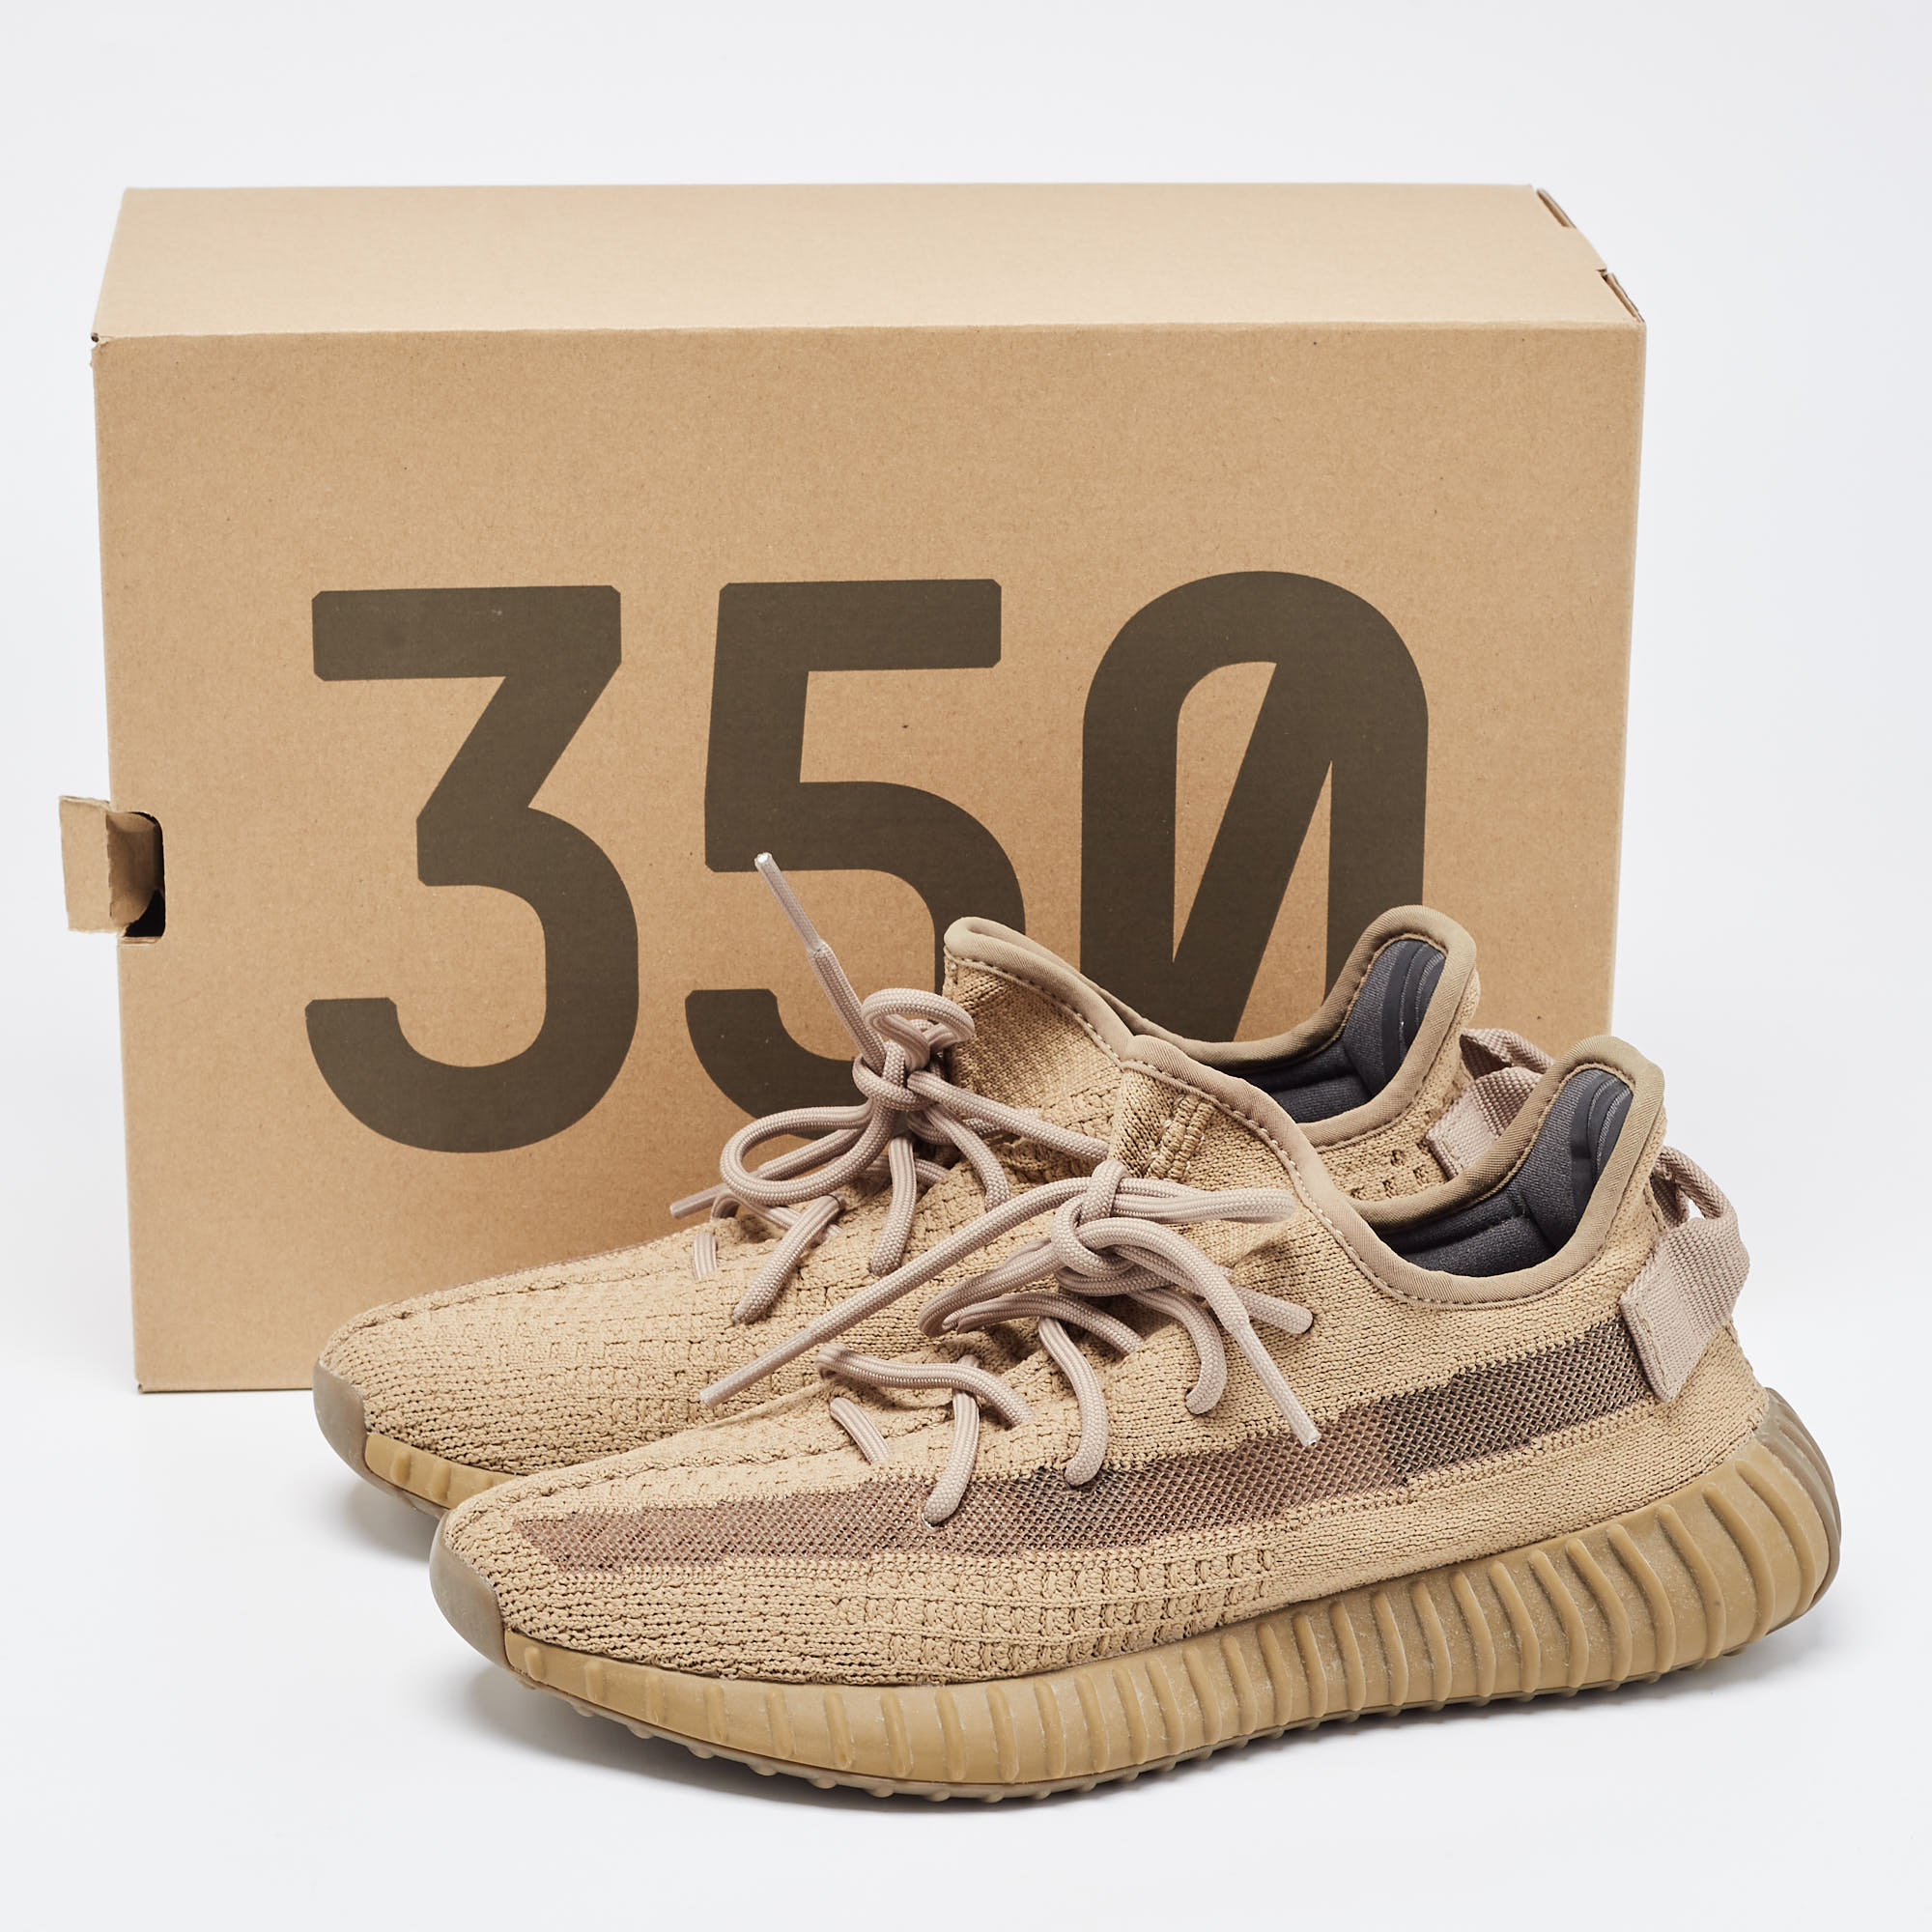 Yeezy X Adidas Brown Knit Fabric Boost 350 V2  Earth Sneakers Size 39 1/3